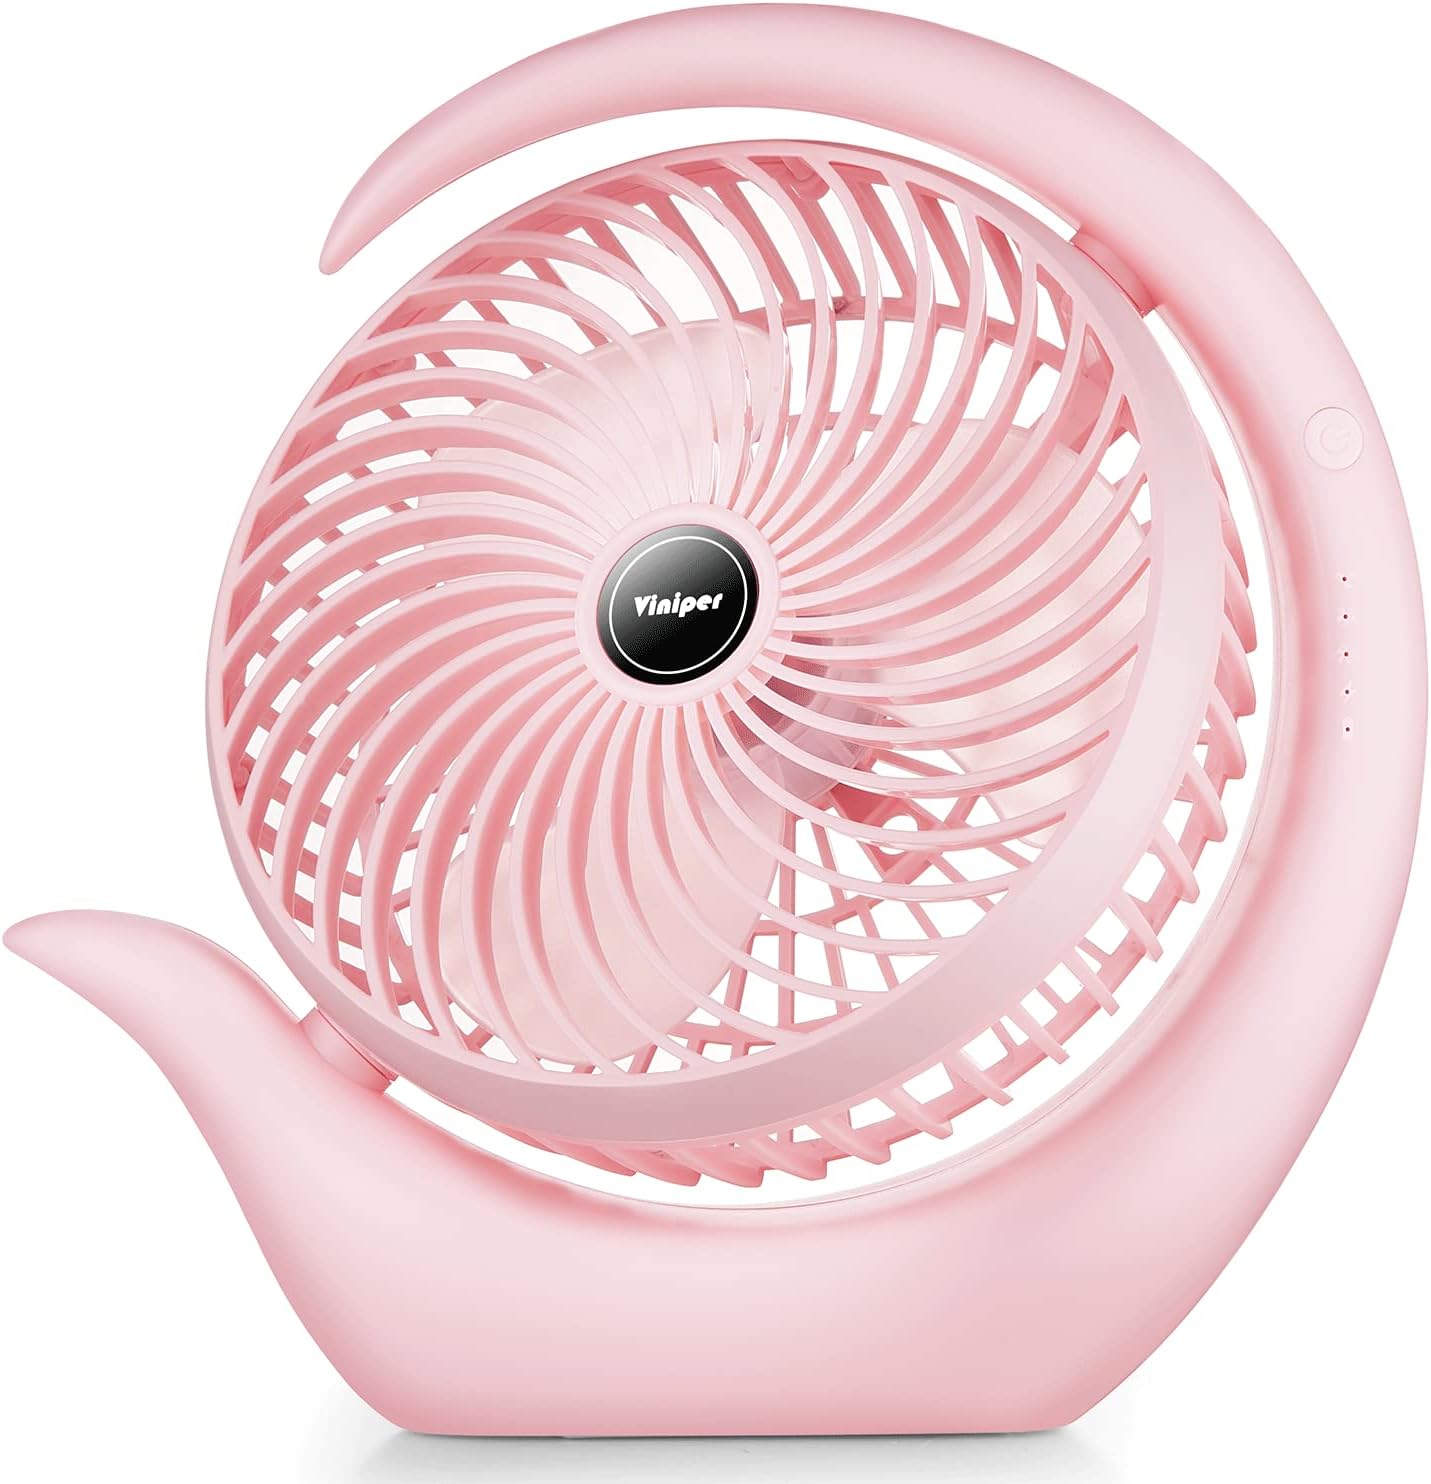 Viniper 8 inch Portable Rechargeable Fan, Small Table Fan : 180 Rotation and 3 Speeds Strong Wind Quiet Desk Fan, Long Working Hours for Home Outdoor - Light Pink